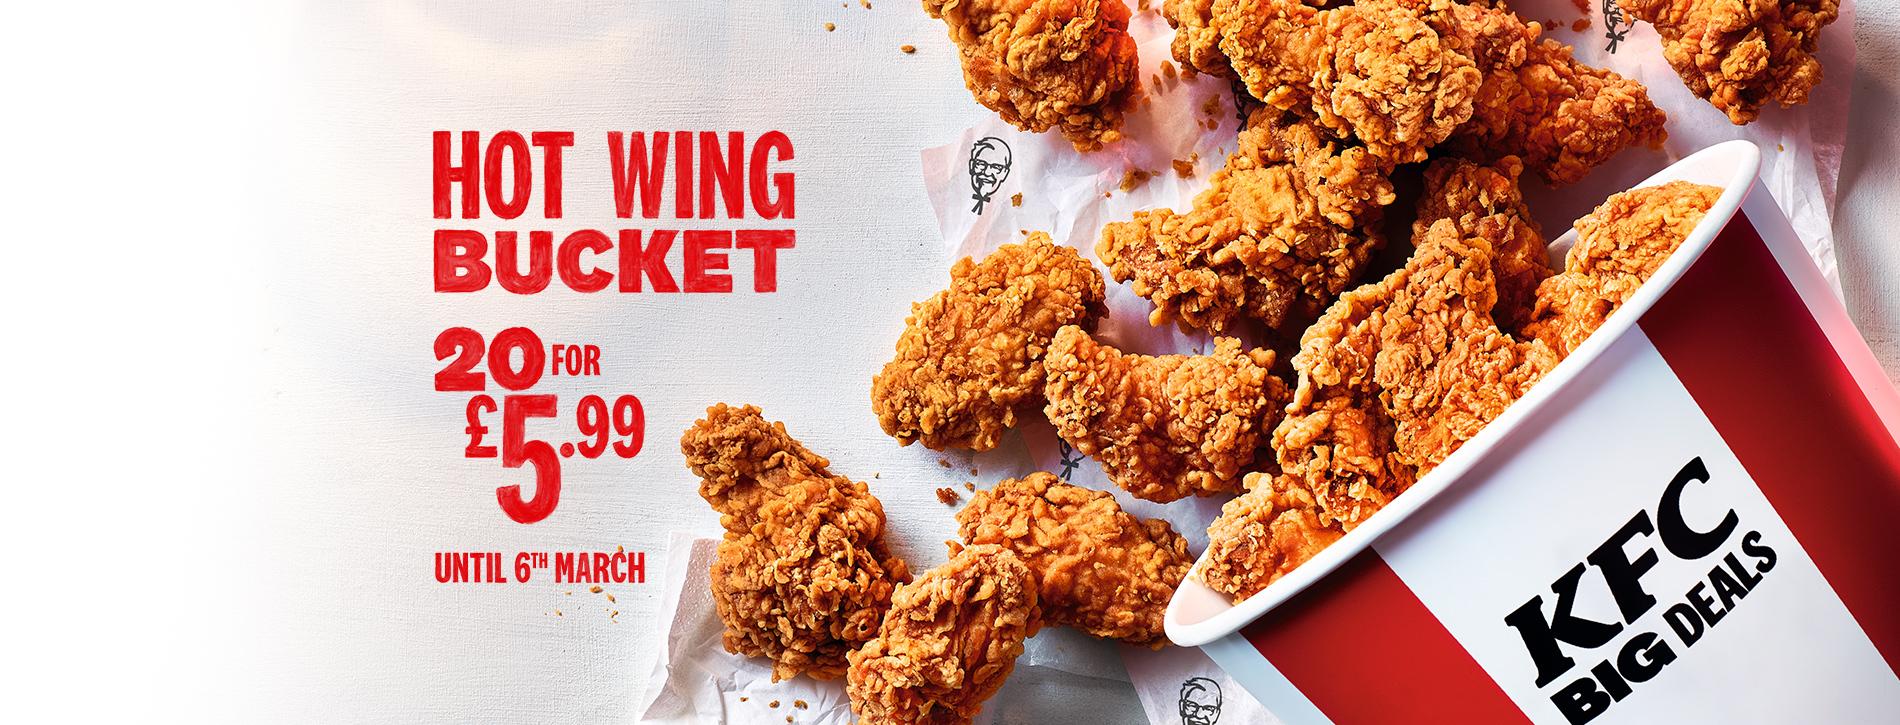 The Mighty Hot Wings Bucket | 20 for £5.99 | Available at KFC